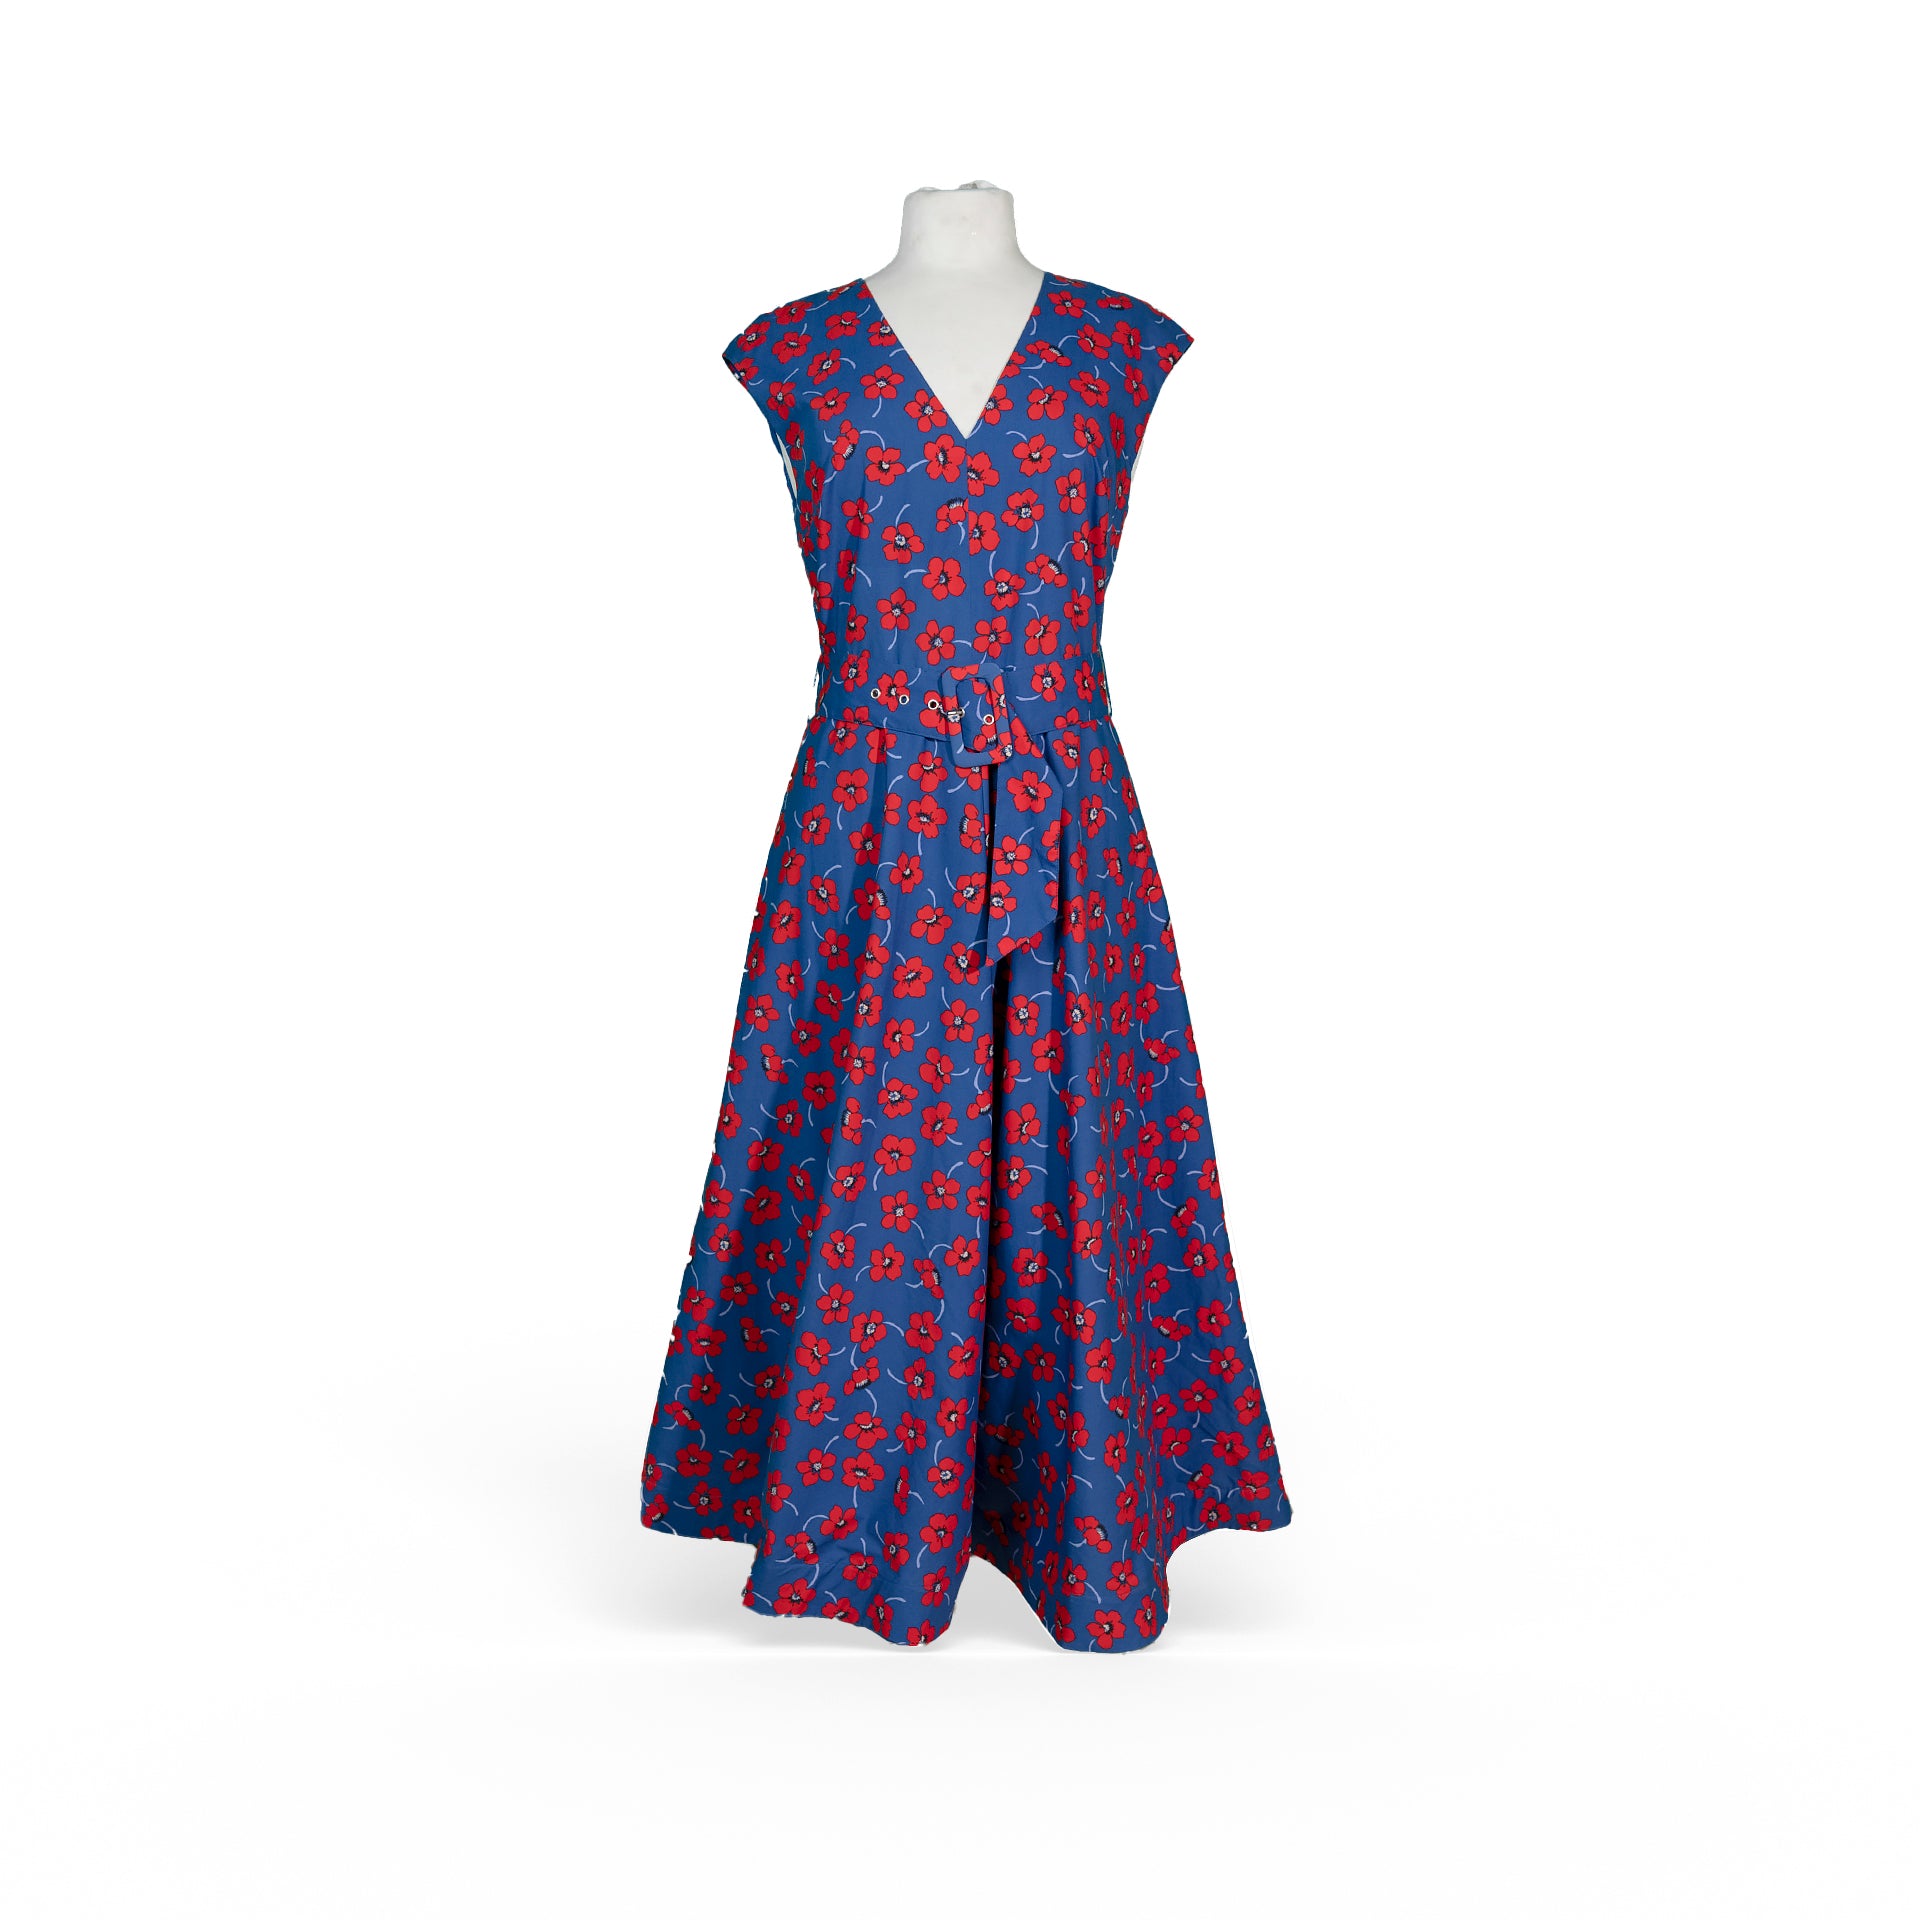 Blue Sleeveless Dress With Red Floral Print From Al Farrasha